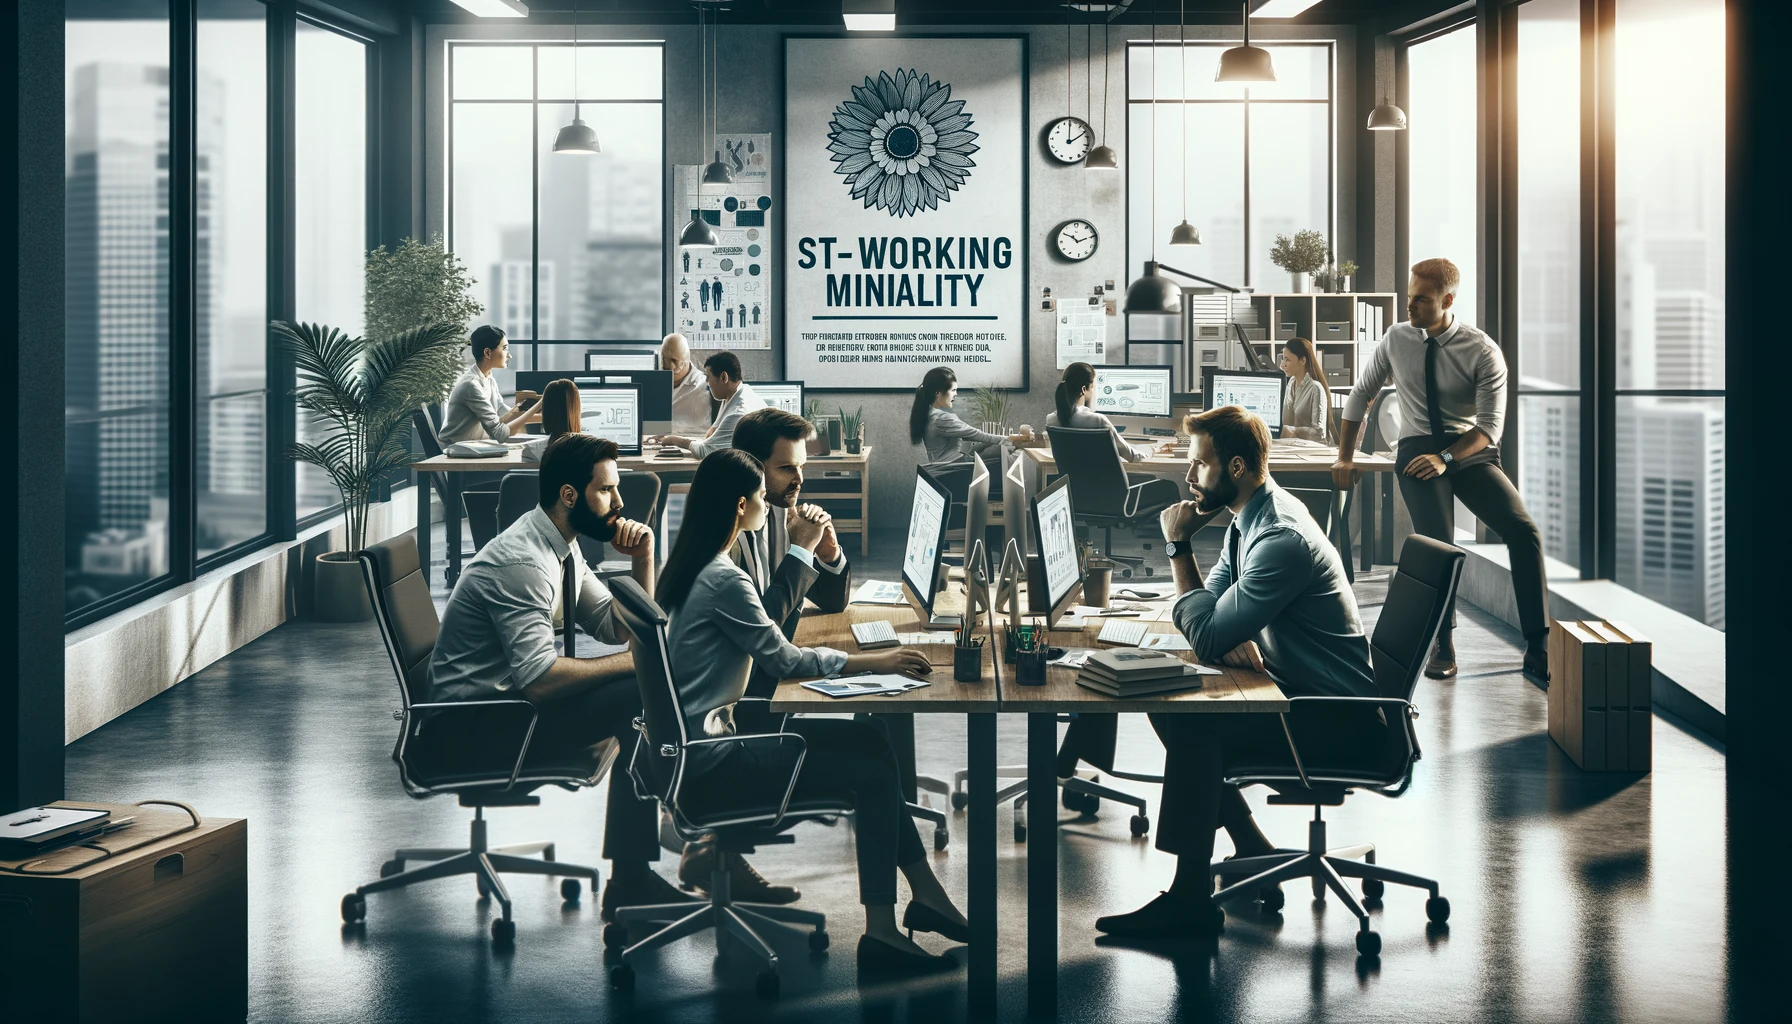 mage of a modern office space with focused individuals at workstations, engaging in collaborative discussions and proactive problem-solving, symbolizing productivity, professionalism, and teamwork in a corporate environment.